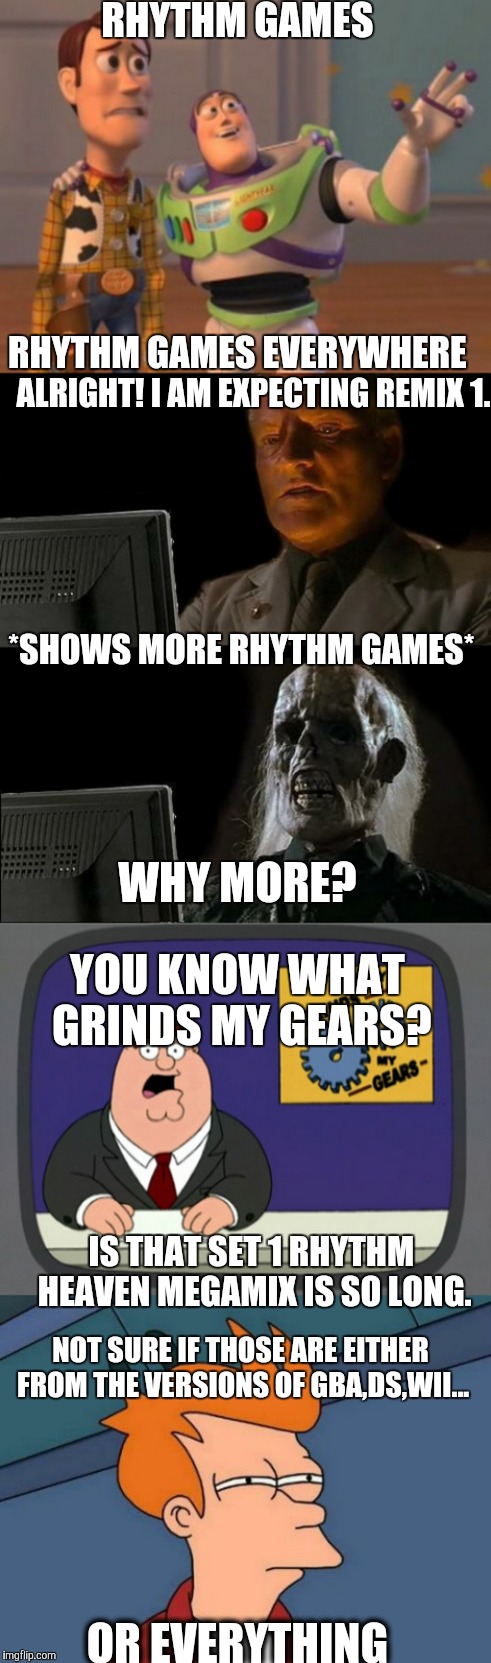 [Multimeme]My Reactions to The First Set in Rhythm Heaven Megamix | RHYTHM GAMES; RHYTHM GAMES EVERYWHERE; ALRIGHT! I AM EXPECTING REMIX 1. *SHOWS MORE RHYTHM GAMES*; WHY MORE? YOU KNOW WHAT GRINDS MY GEARS? IS THAT SET 1 RHYTHM HEAVEN MEGAMIX IS SO LONG. NOT SURE IF THOSE ARE EITHER FROM THE VERSIONS OF GBA,DS,WII... OR EVERYTHING | image tagged in memes,nintendo 3ds,nintendo,rhythm heaven,rhythm heaven megamix | made w/ Imgflip meme maker